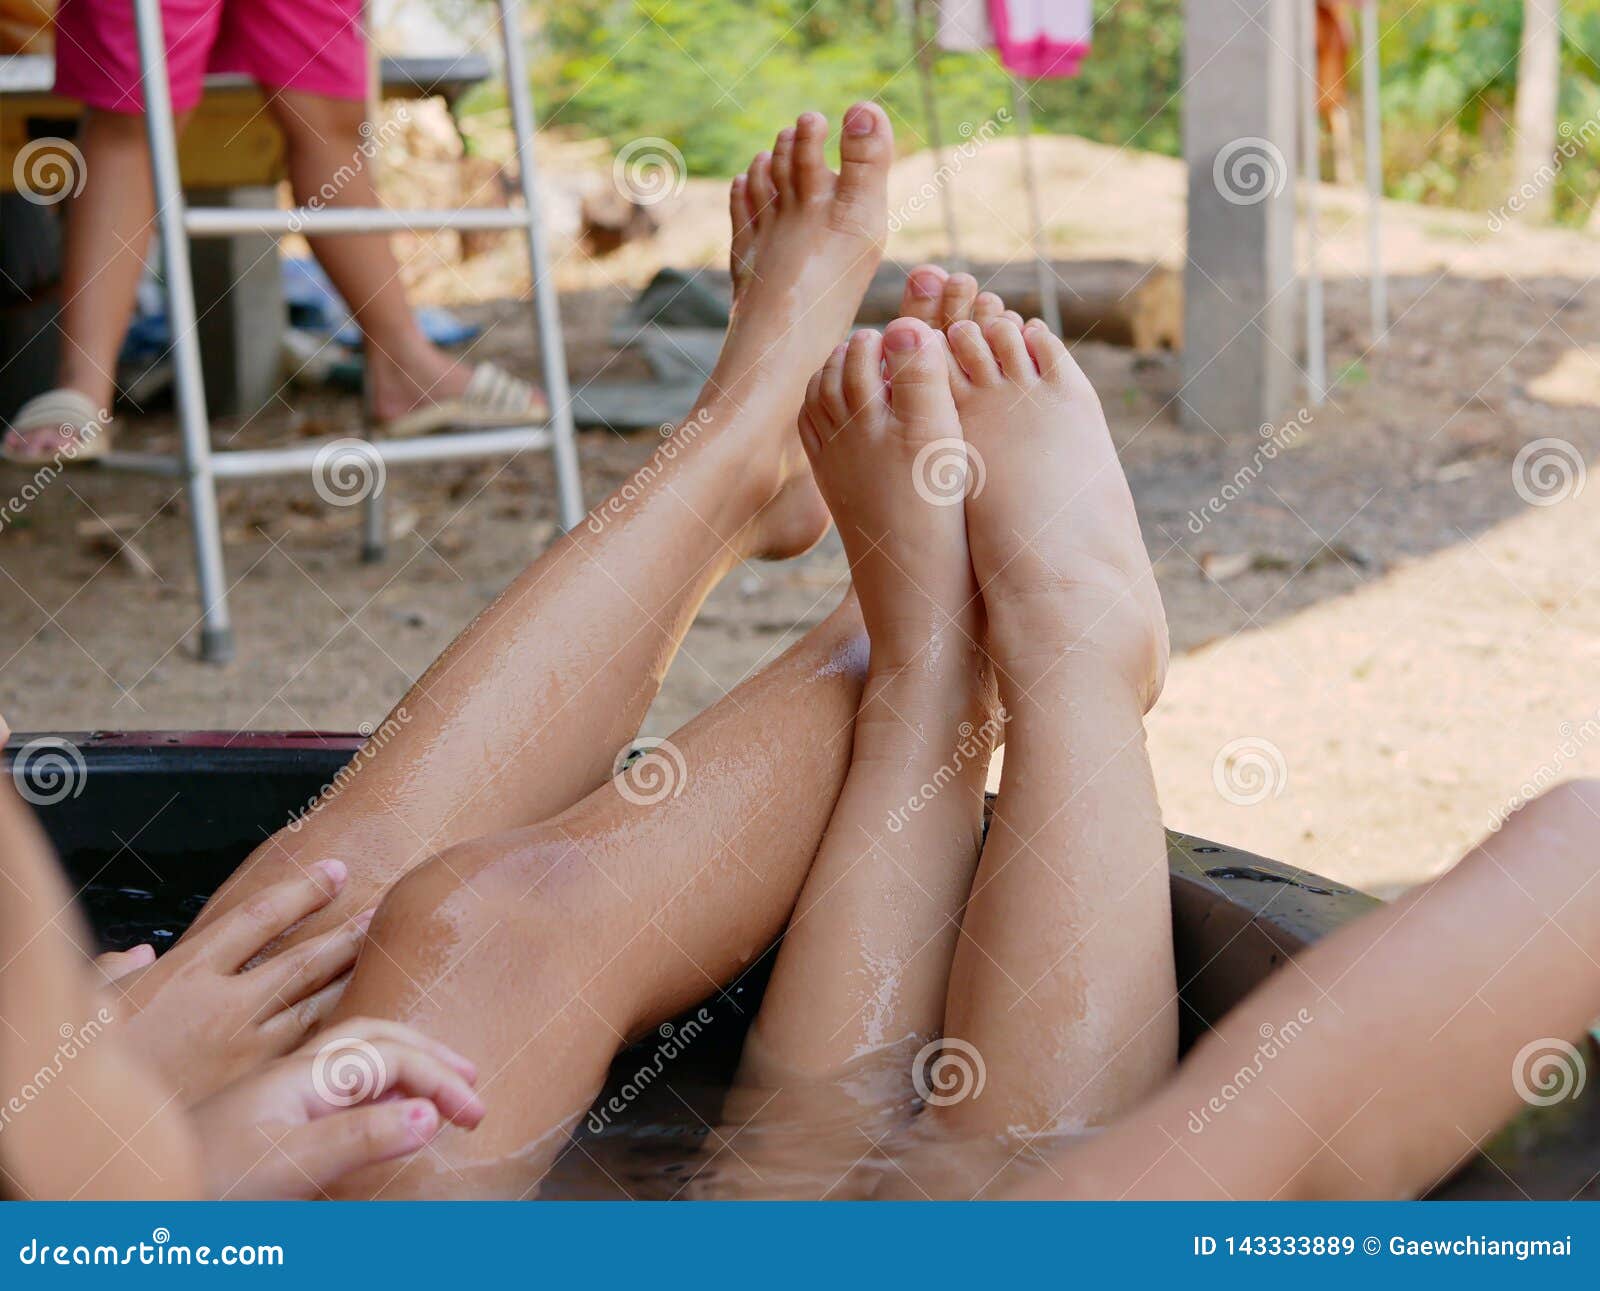 6 235 Girls Feet Photos Free Royalty Free Stock Photos From Dreamstime